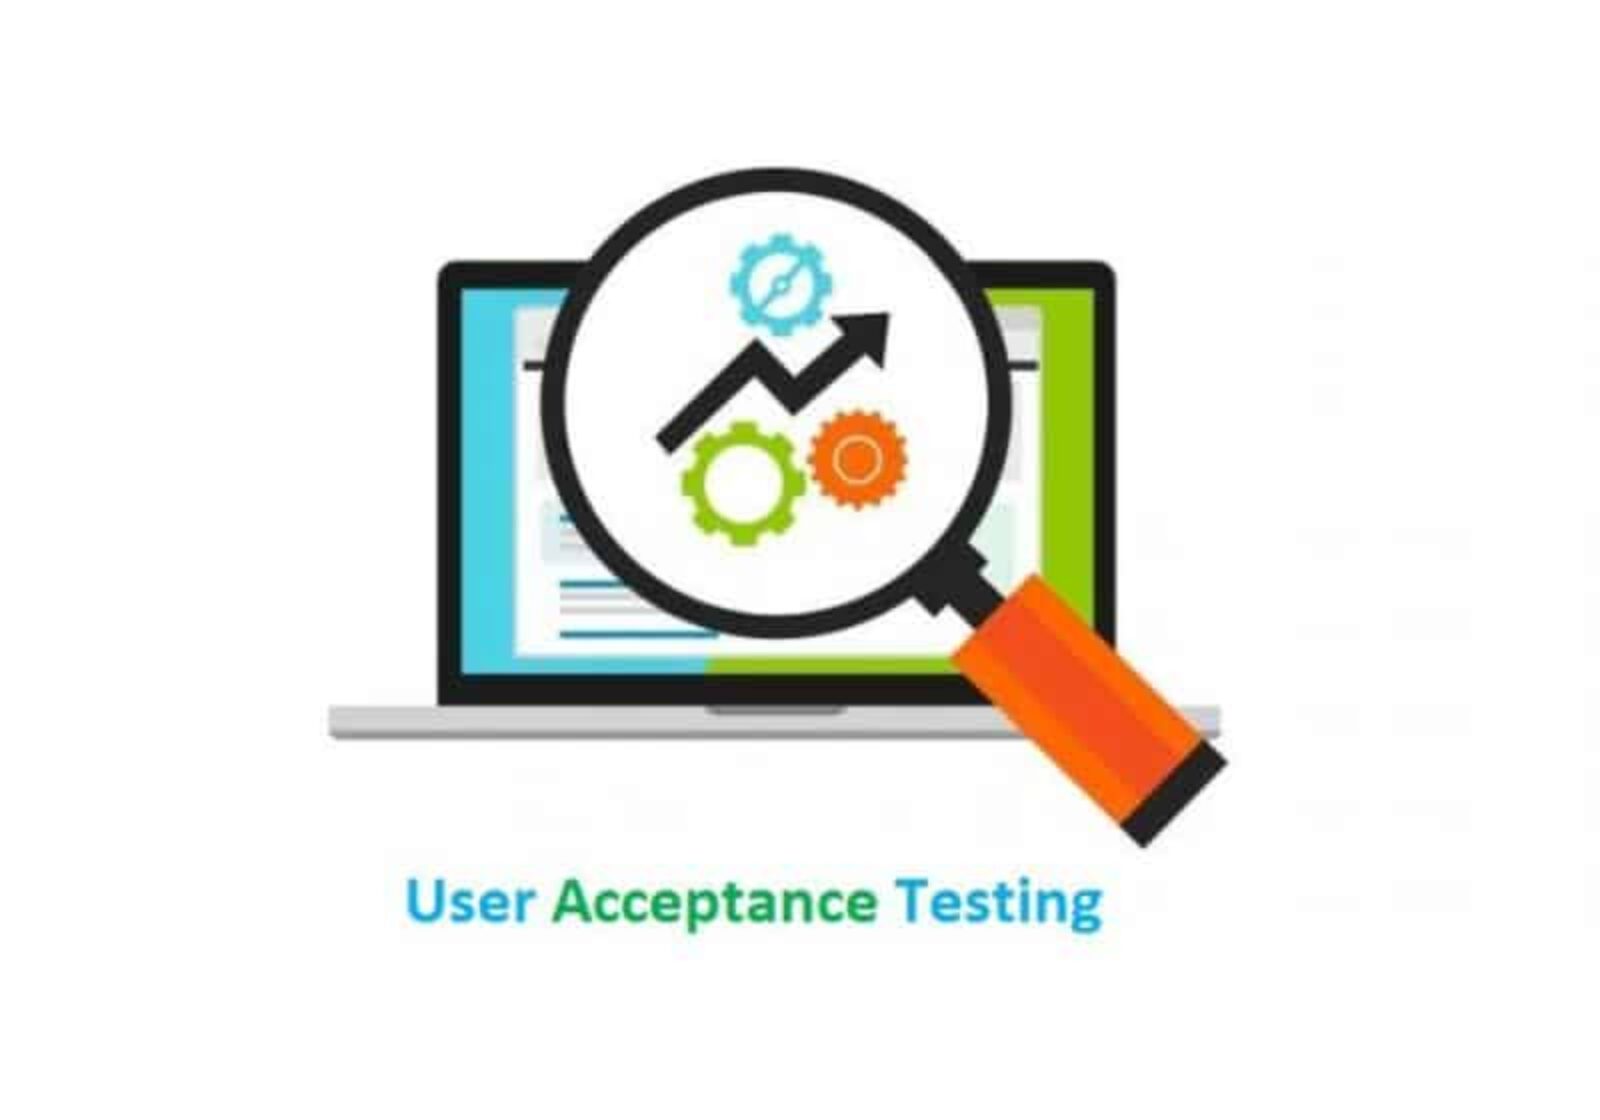 Understanding When User Acceptance Testing Should Be Executed